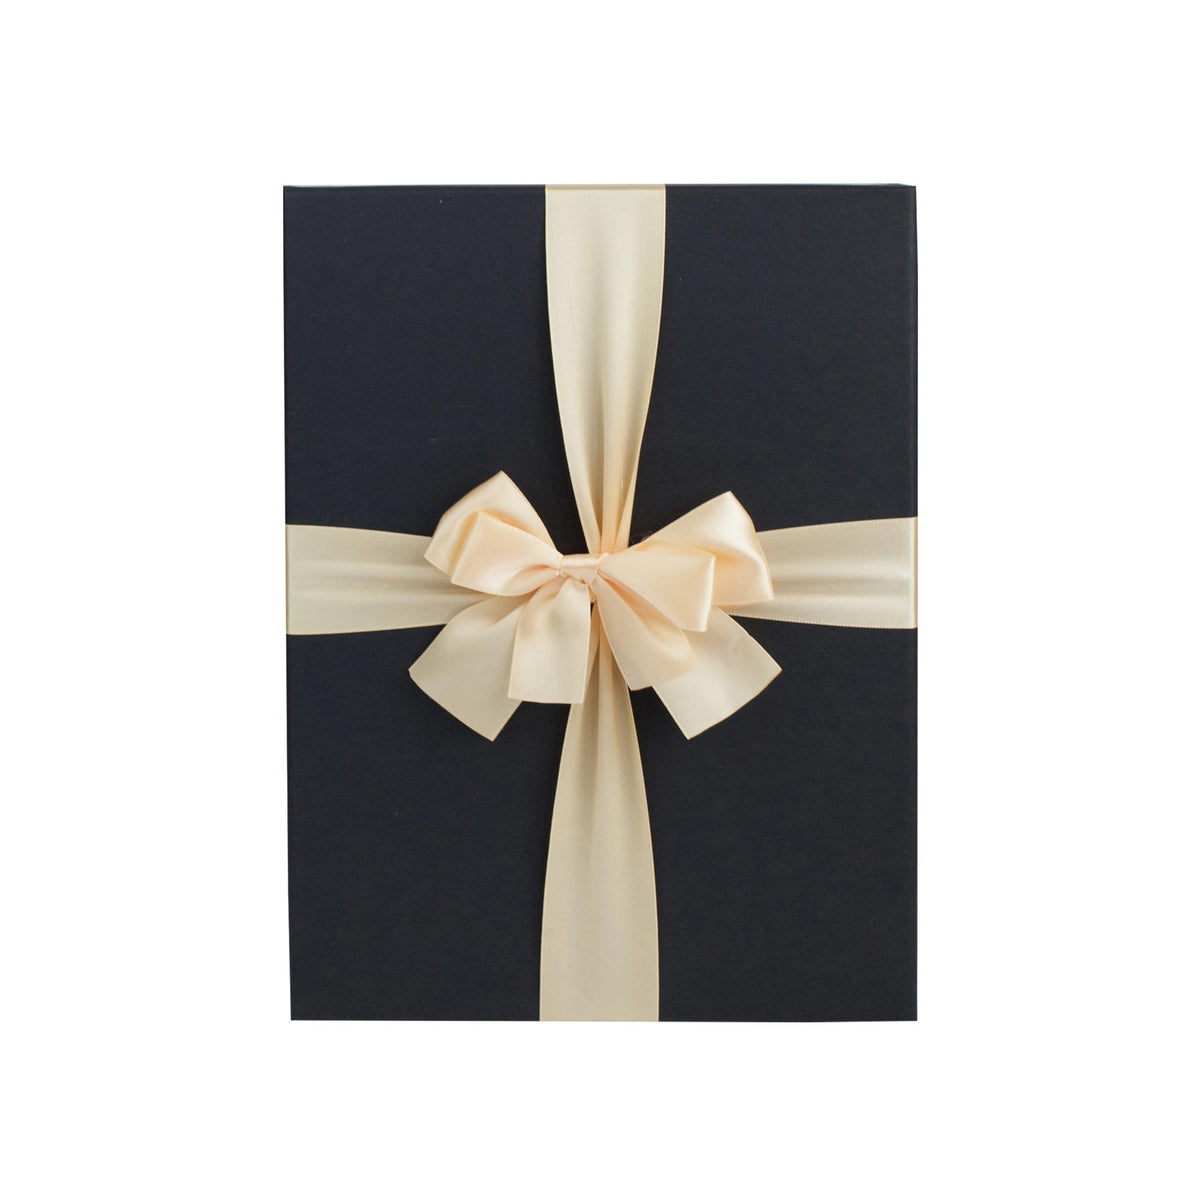 Stylish black gift box with contrasting interior